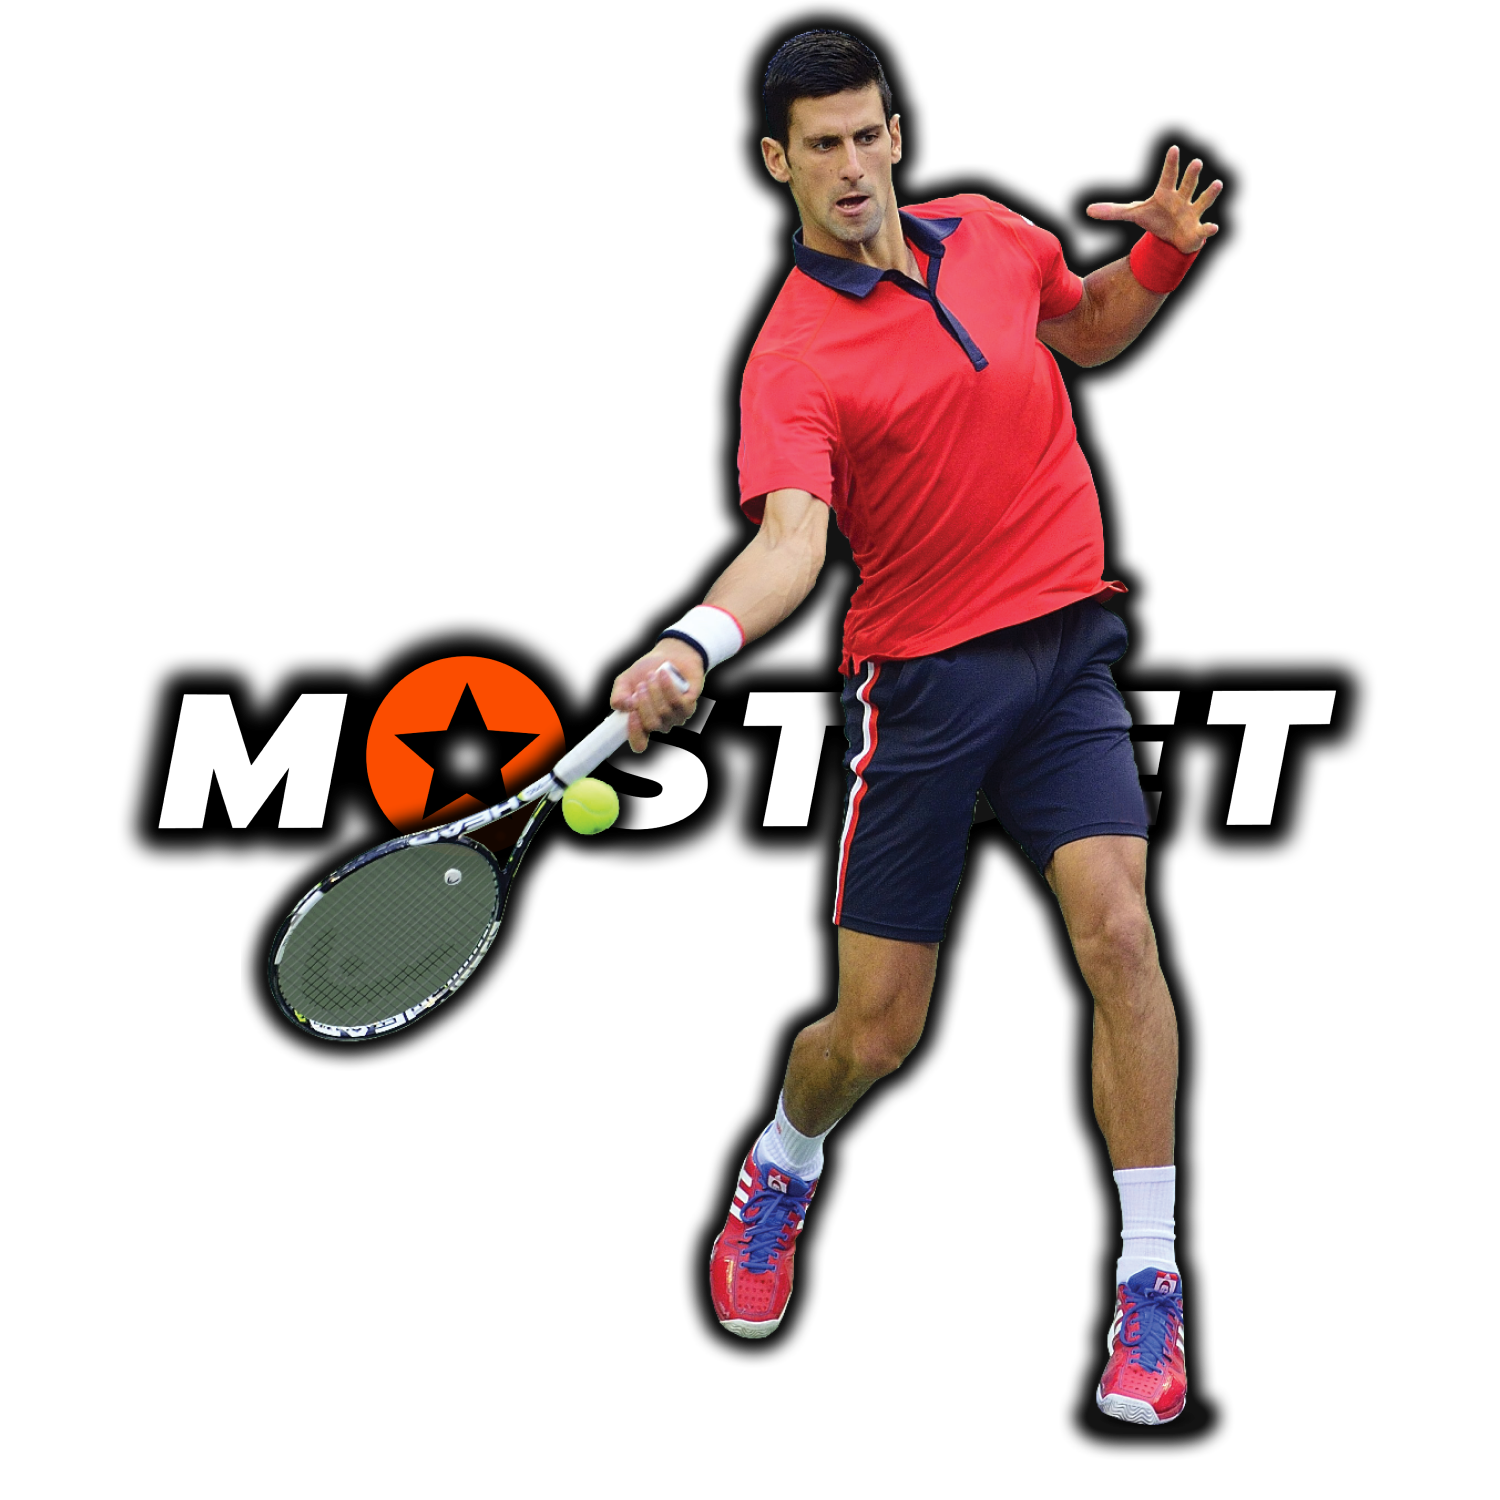 Mostbet Tennis Betting in India, Start and Get Up to ₹25,000